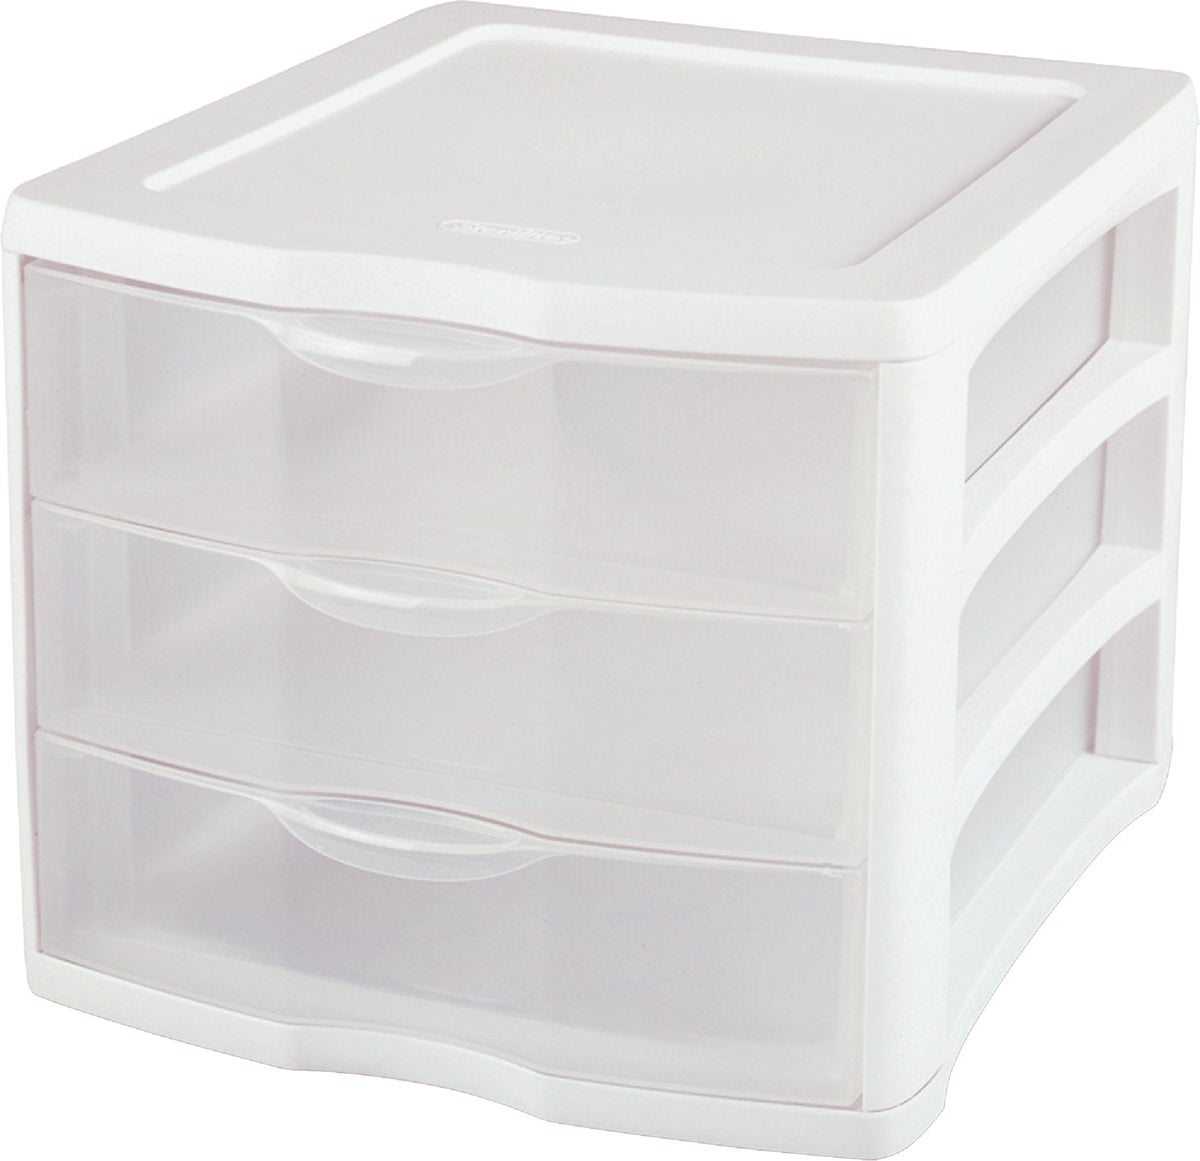 Buy Sterilite ClearView 3Drawer Storage Unit White